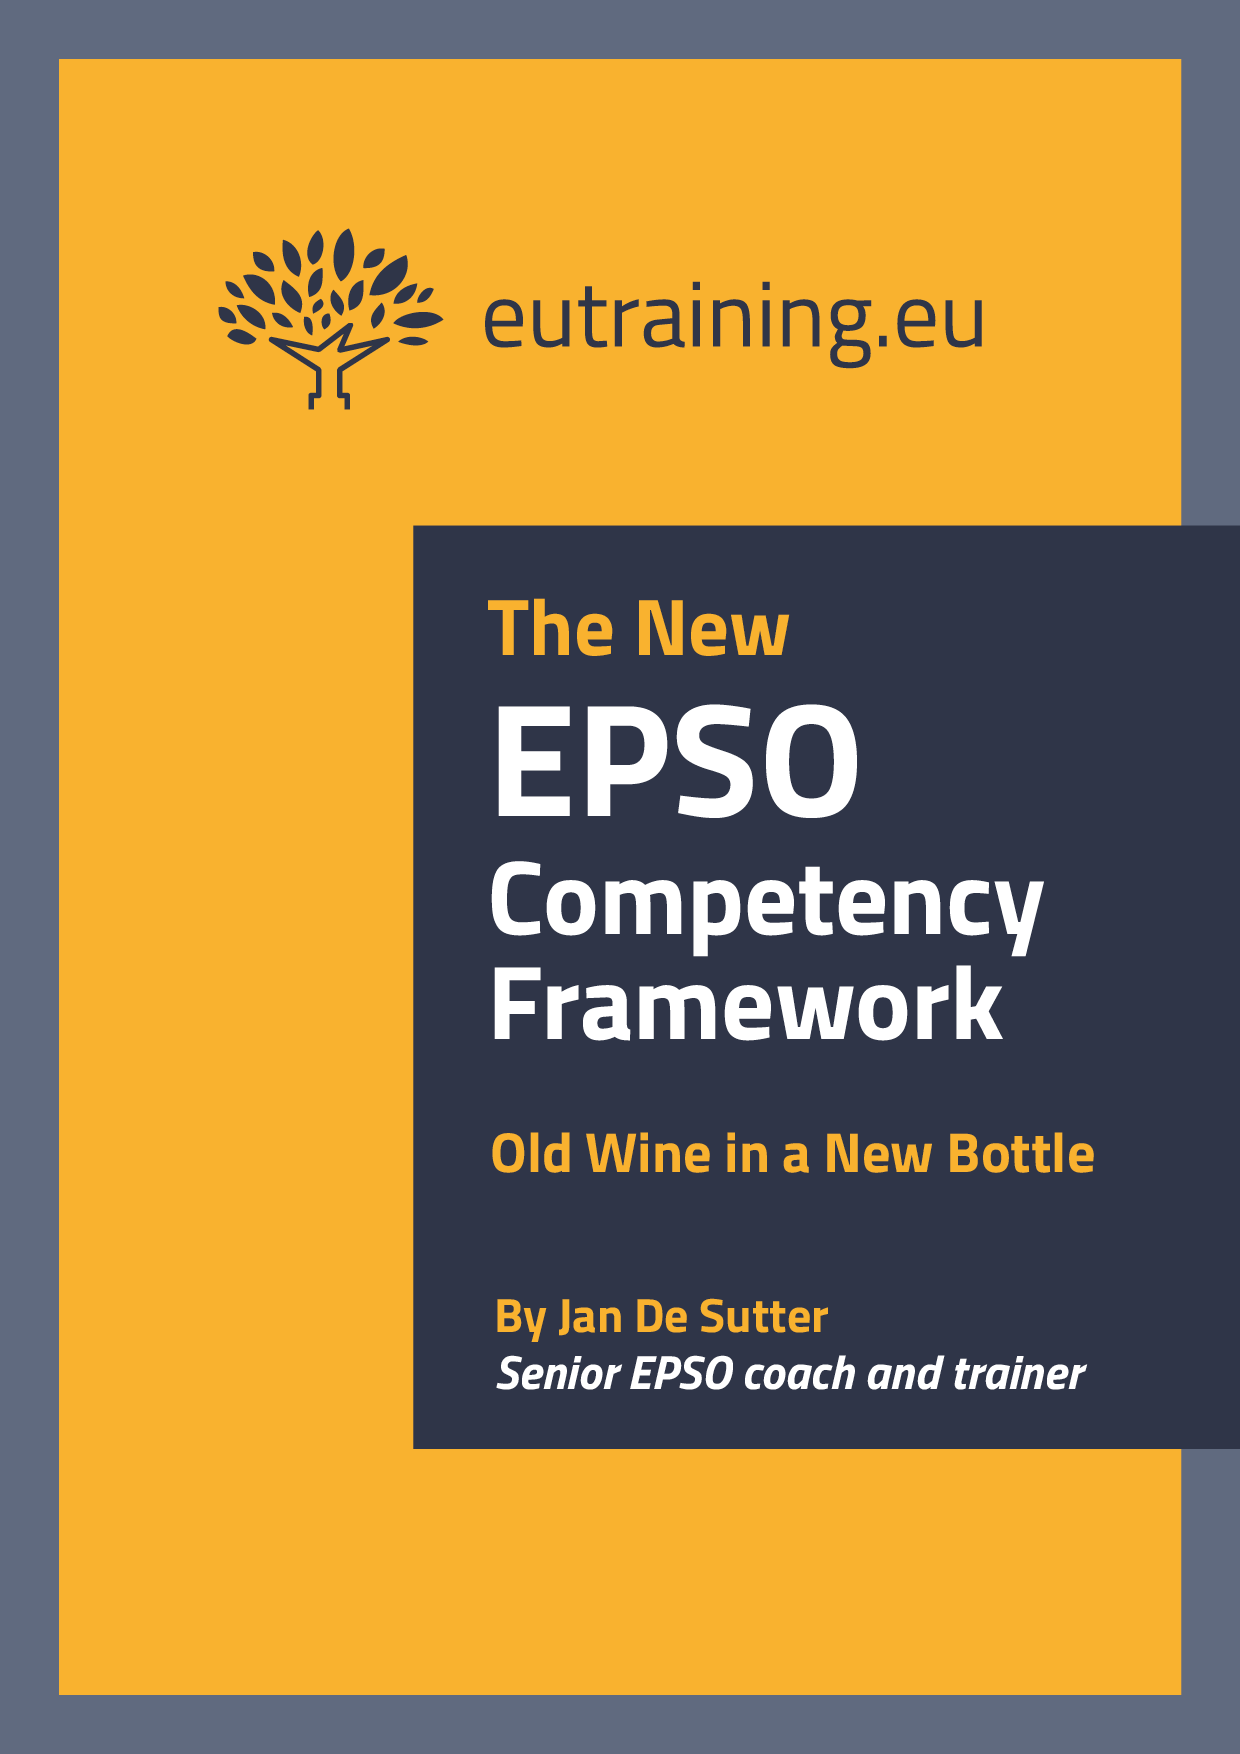 Analysing the Differences between the current and the new EPSO competency framework.